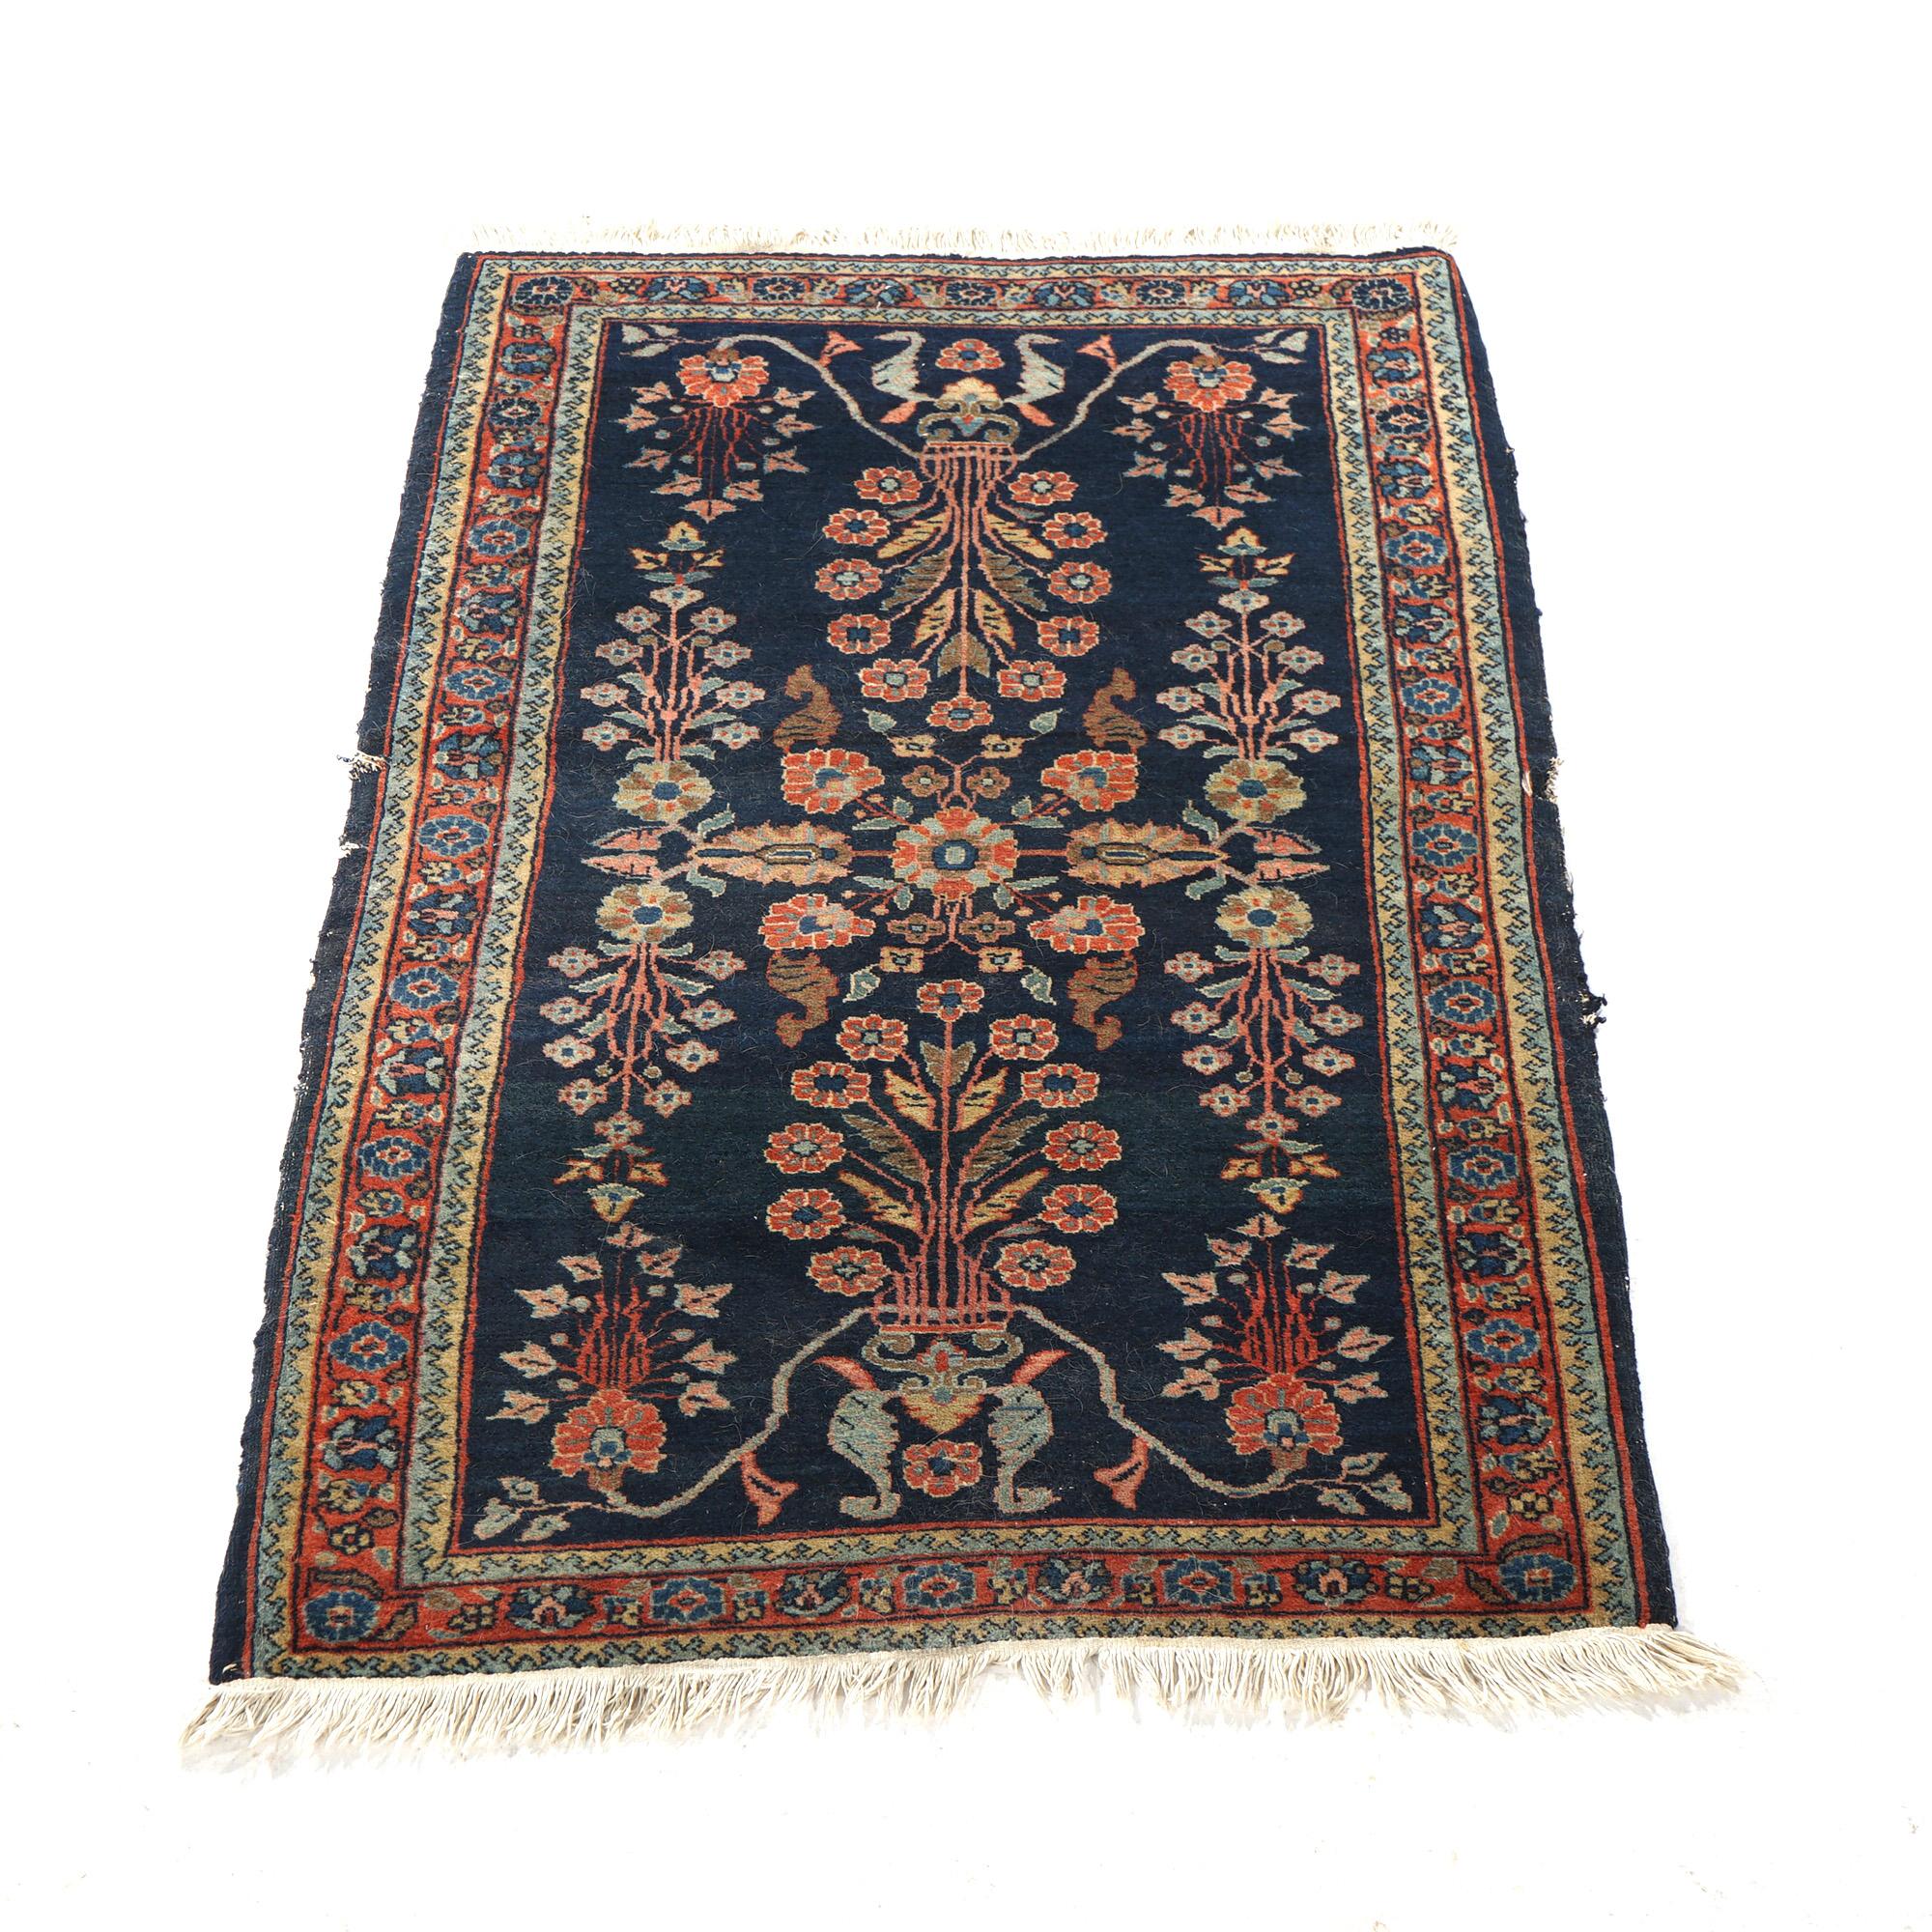 An antique Blue Sarouk Oriental Rug with Stylized Flowers, circa 1920

Measures - 49.5